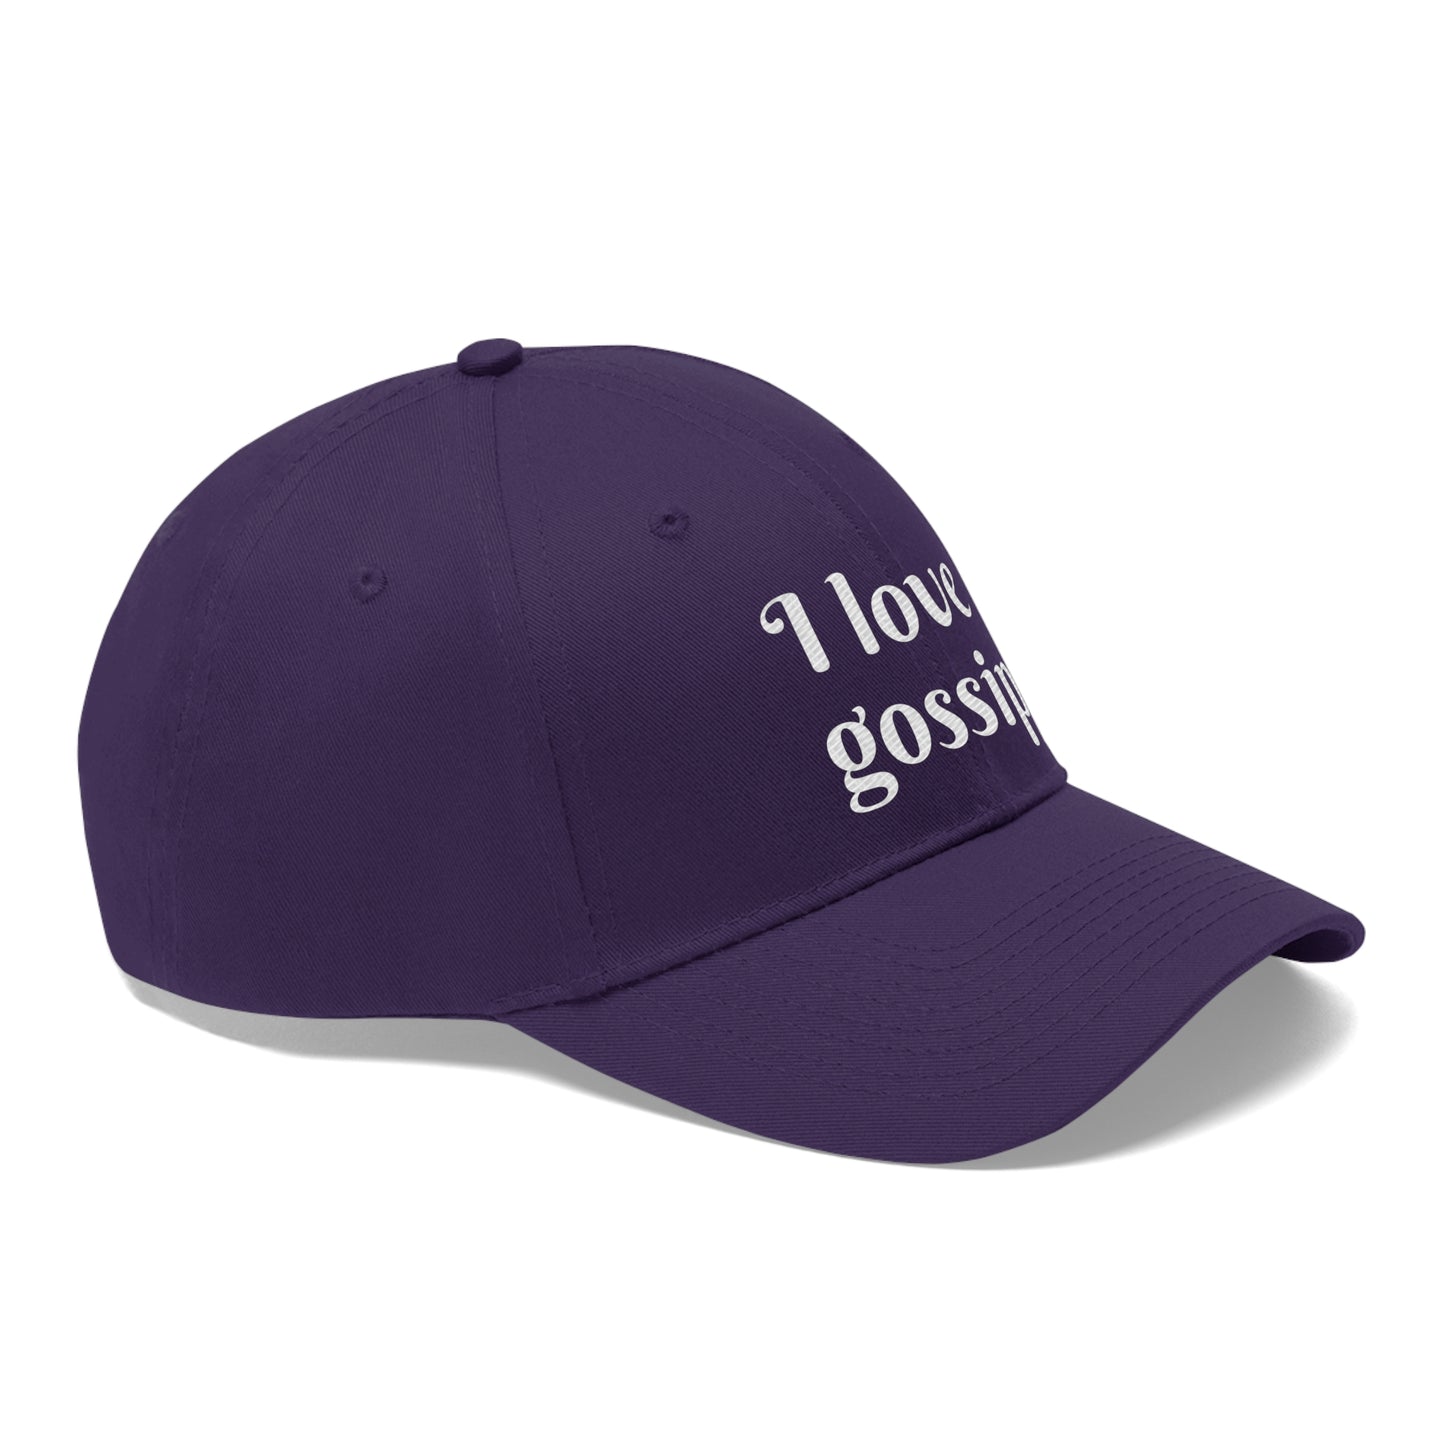 I Love Gossip Embroidered Hat for Chatty Souls